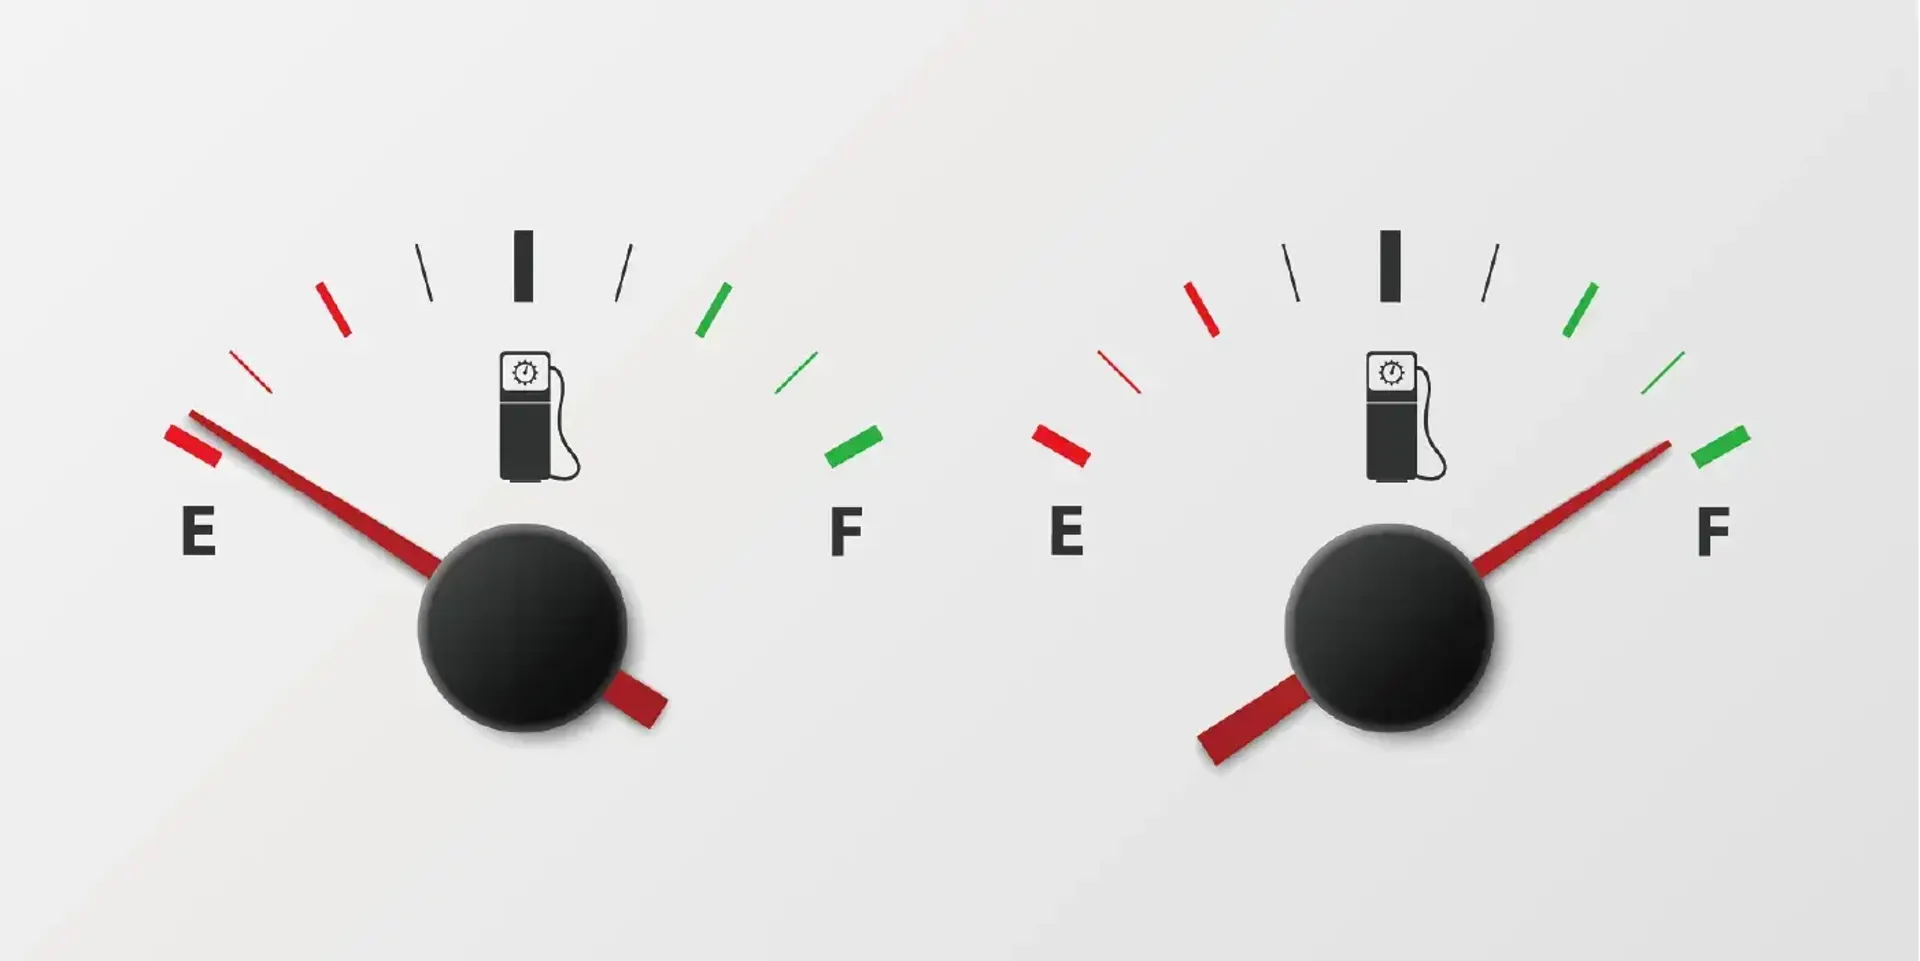 Two fuel gauges- one showing empty, one showing full